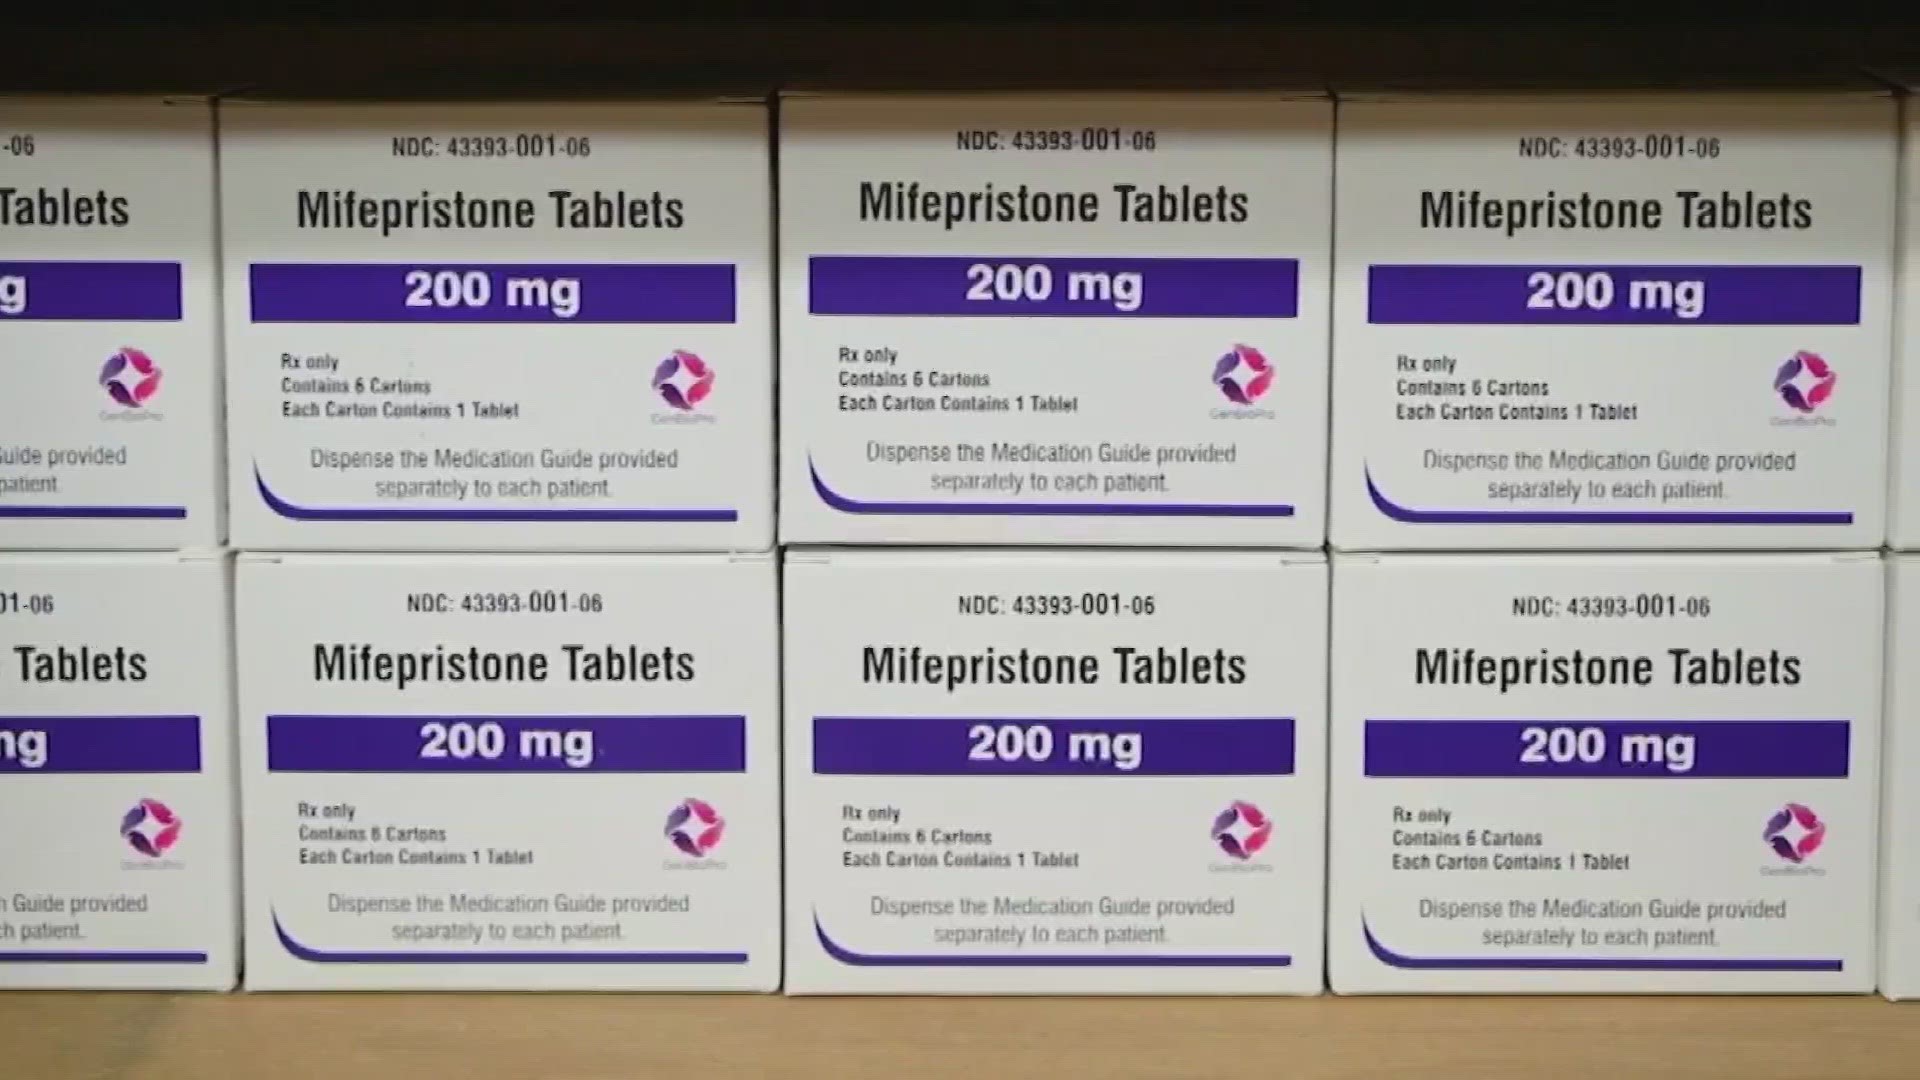 California is now stockpiling abortion pills while the Biden administration calls on the courts to make a ruling soon.